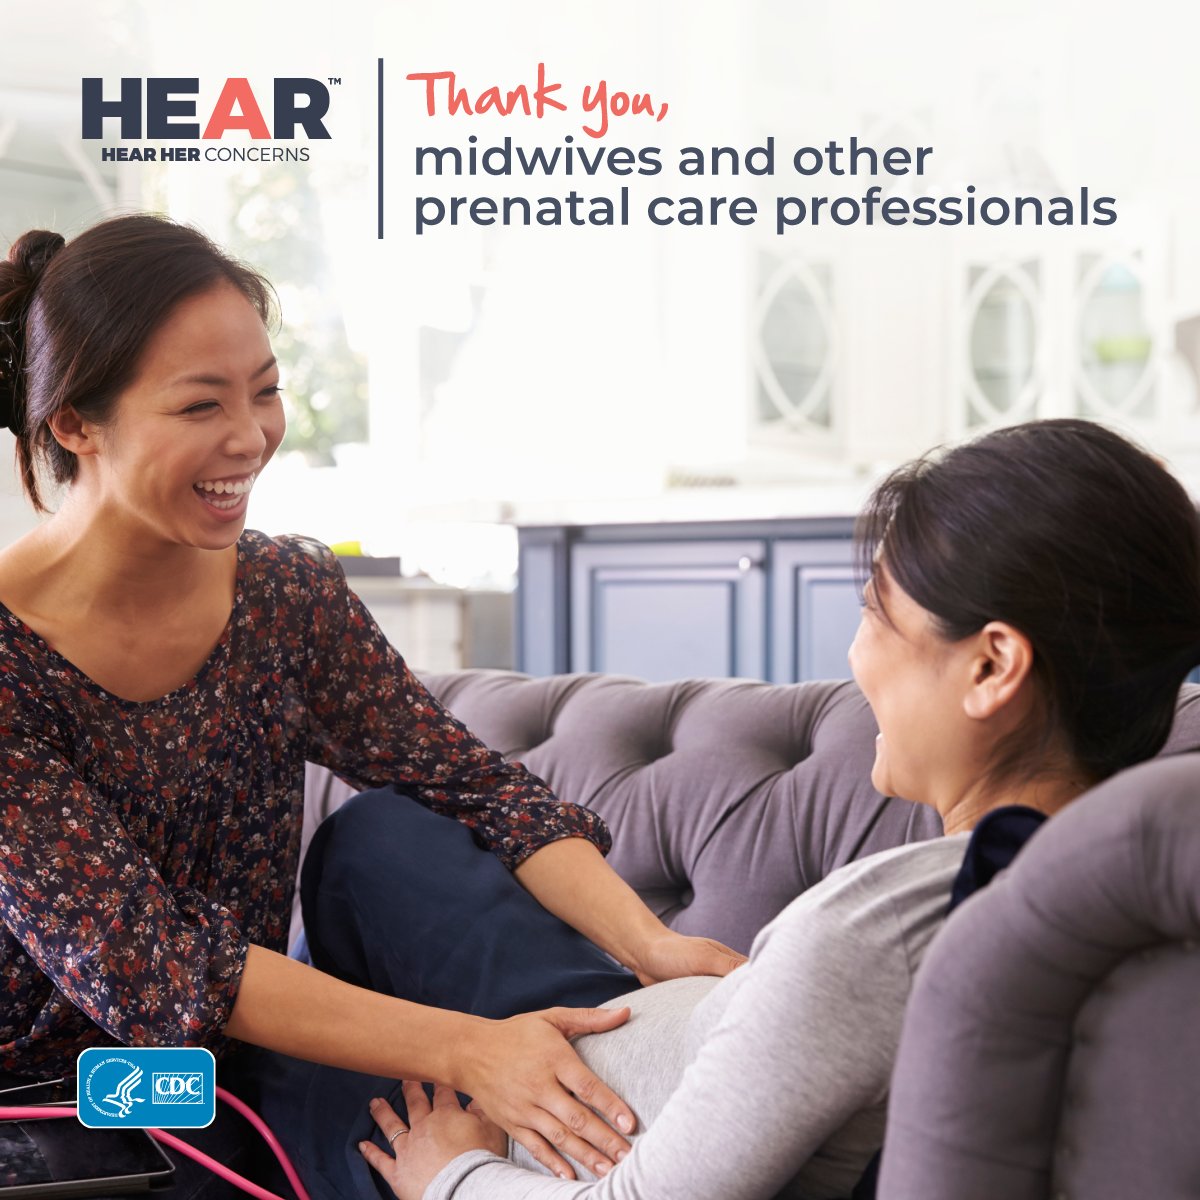 Today is #InternationalMidwivesDay! Please join us in thanking all #midwives, who play a vital role in supporting people during and after pregnancy and eliminating preventable maternal mortality. bit.ly/CDCHearHerProv… #HearHer